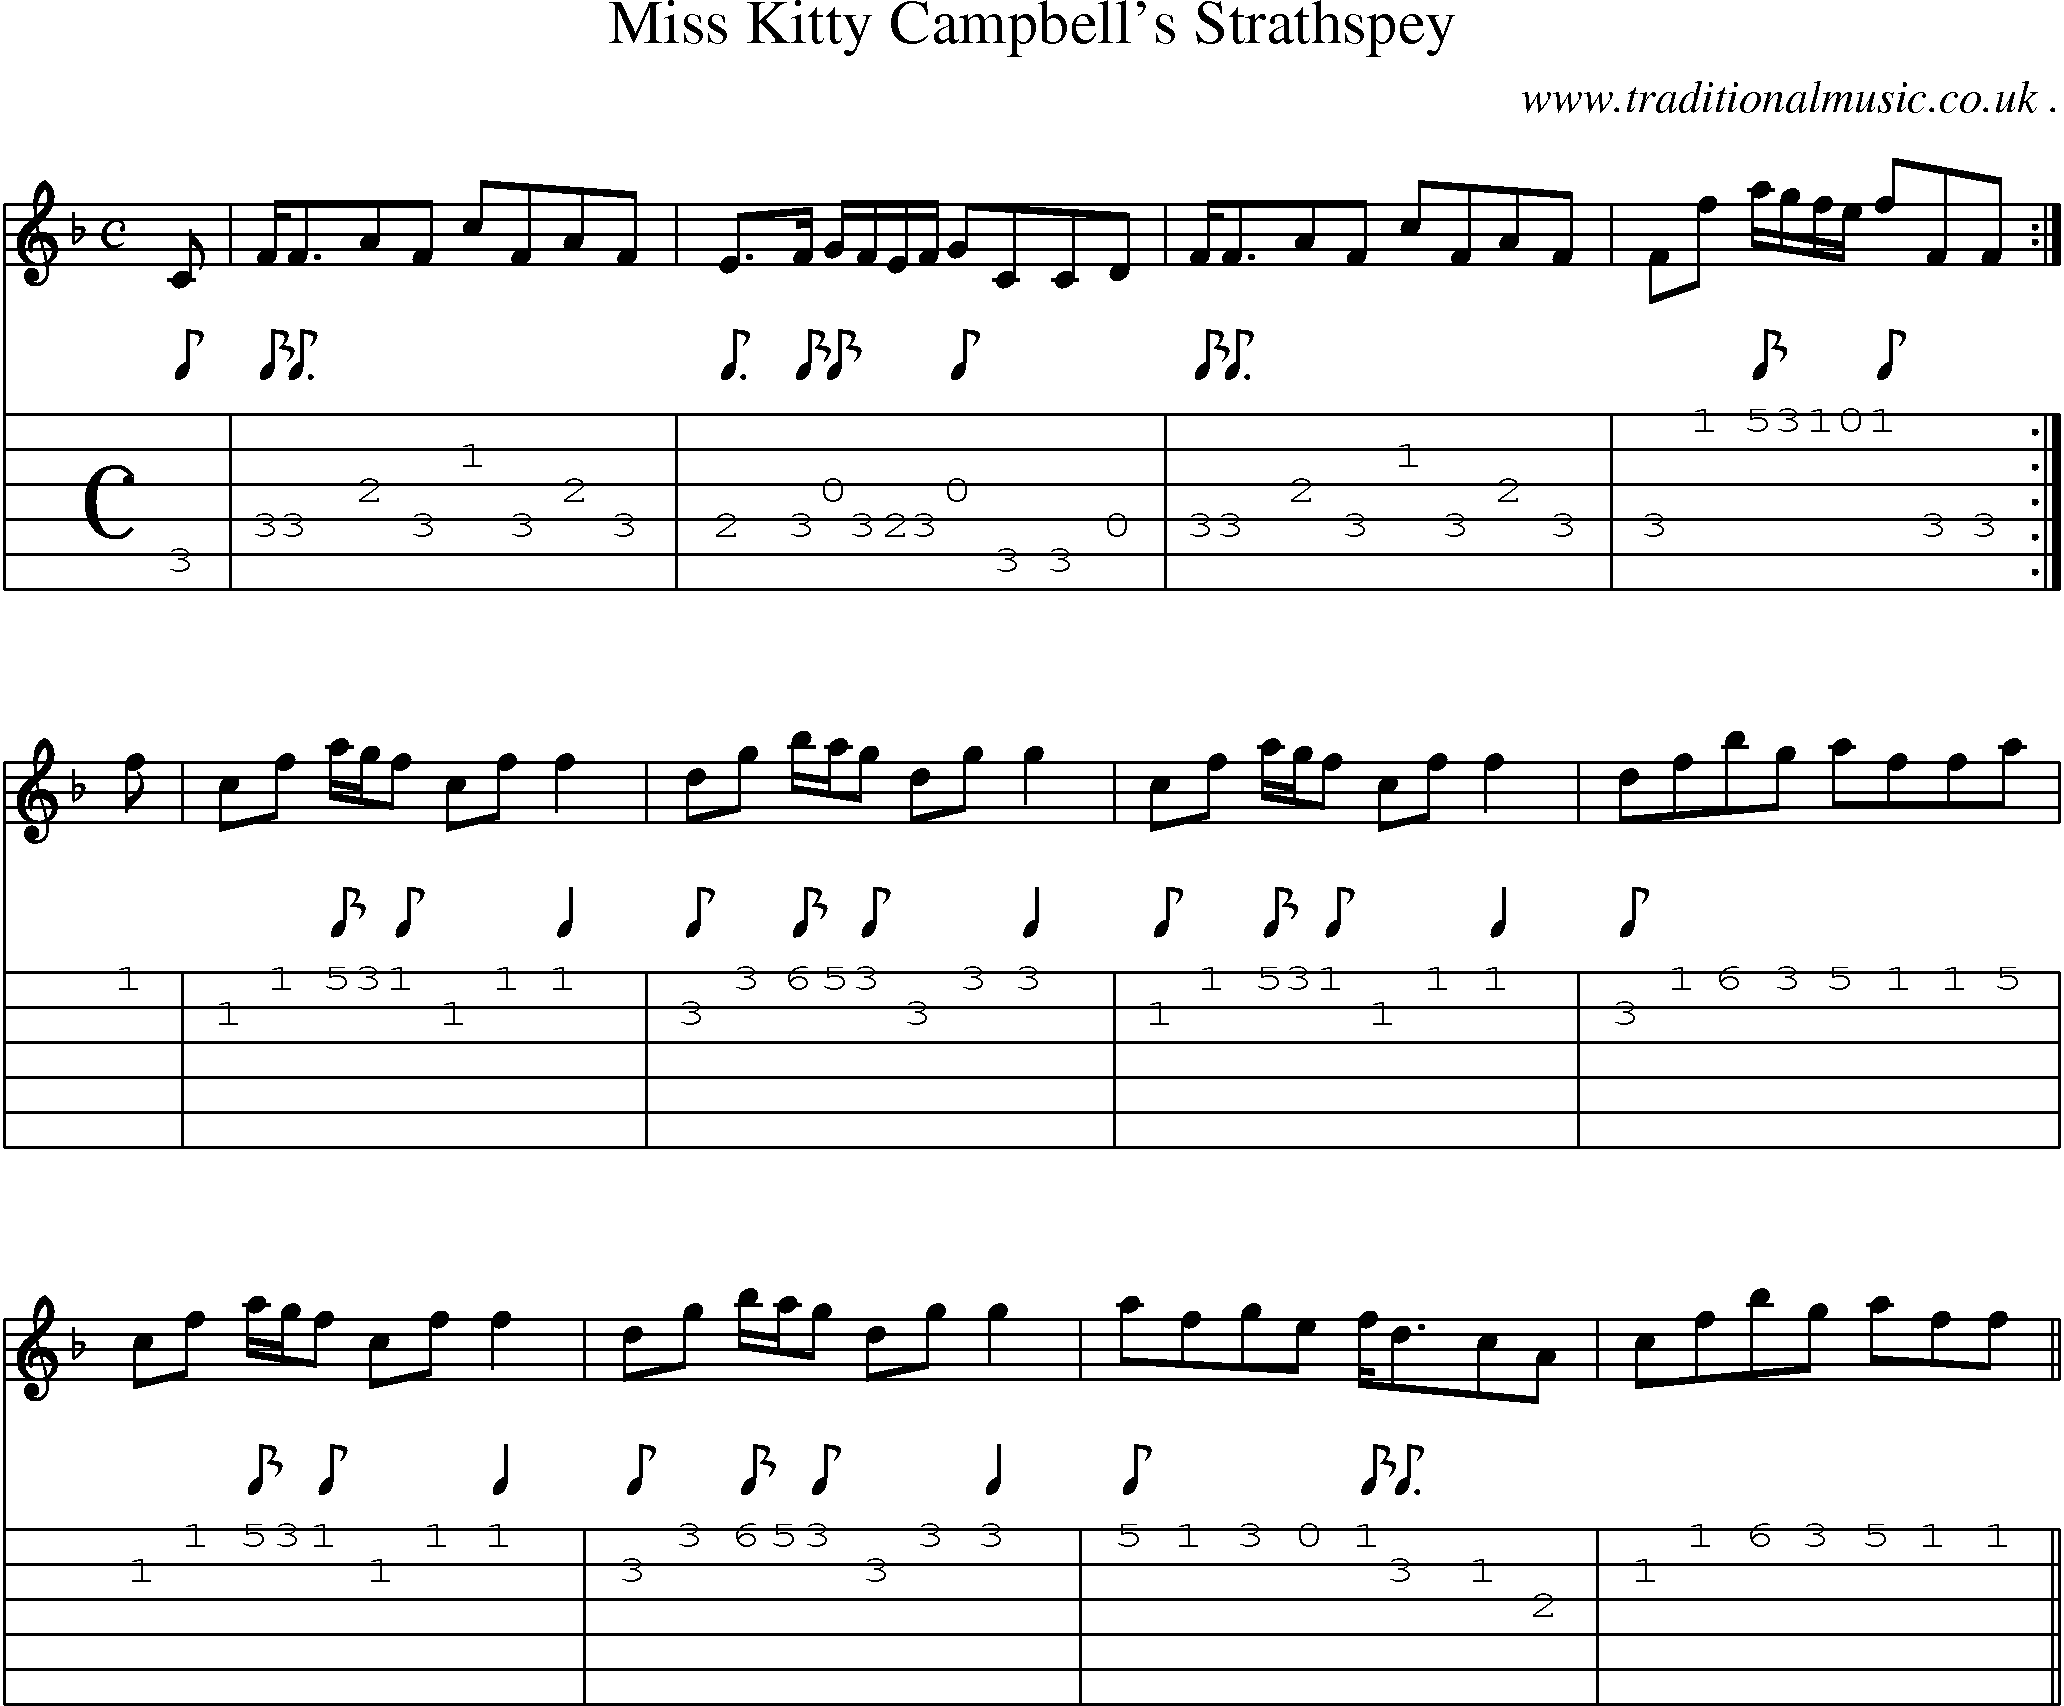 Sheet-Music and Guitar Tabs for Miss Kitty Campbells Strathspey